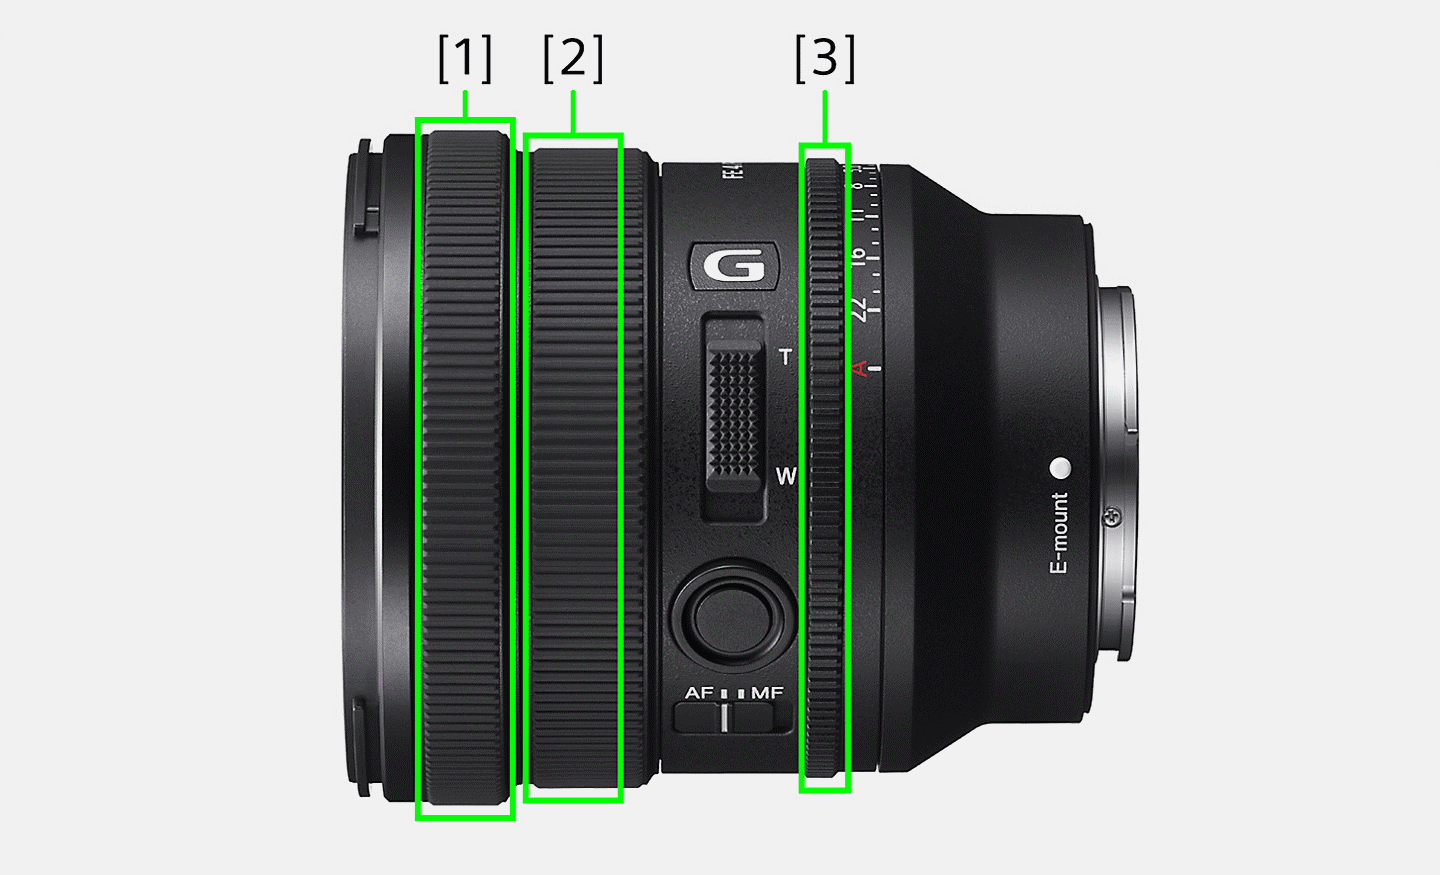 Product image showing Focusing ring, Zoom ring and Aperture ring